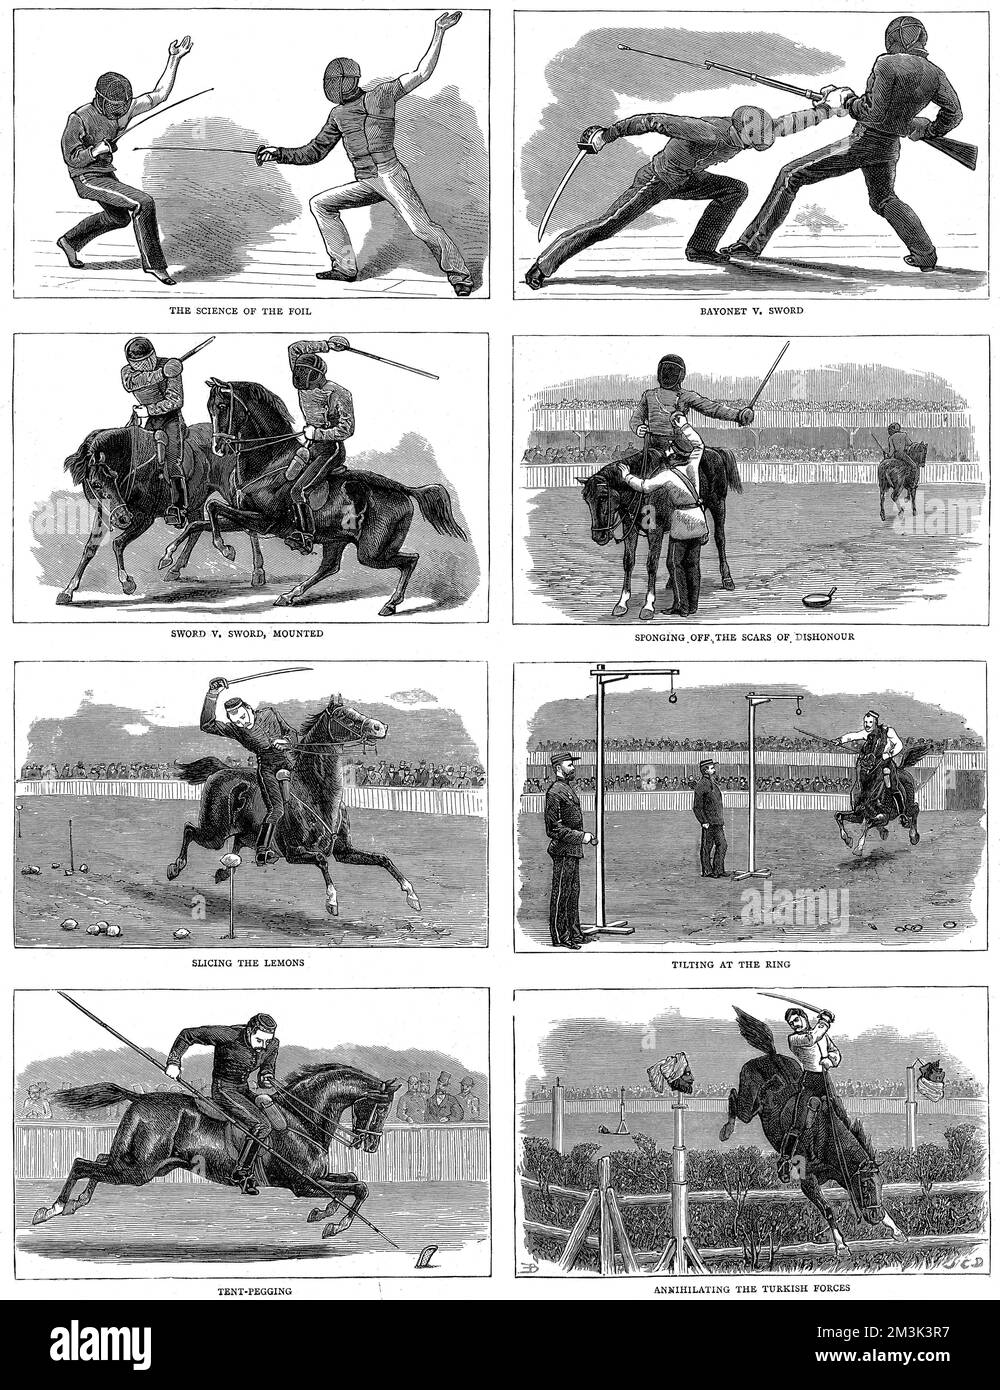 Series of engravings showing seven of the events held during the Military Tournament and Assault of Arms, Agricultural Hall, Islington, June 1880.   The images depict (clockwise from top right): Bayonet vs. Sword; Sponging off the Scars of Dishonour; Tilting at the Ring; Annihilating the Turkish Forces; Tent-Pegging; Slicing the Lemons; Sword vs. Sword, mounted; The Science of the Foil.  1880 Stock Photo